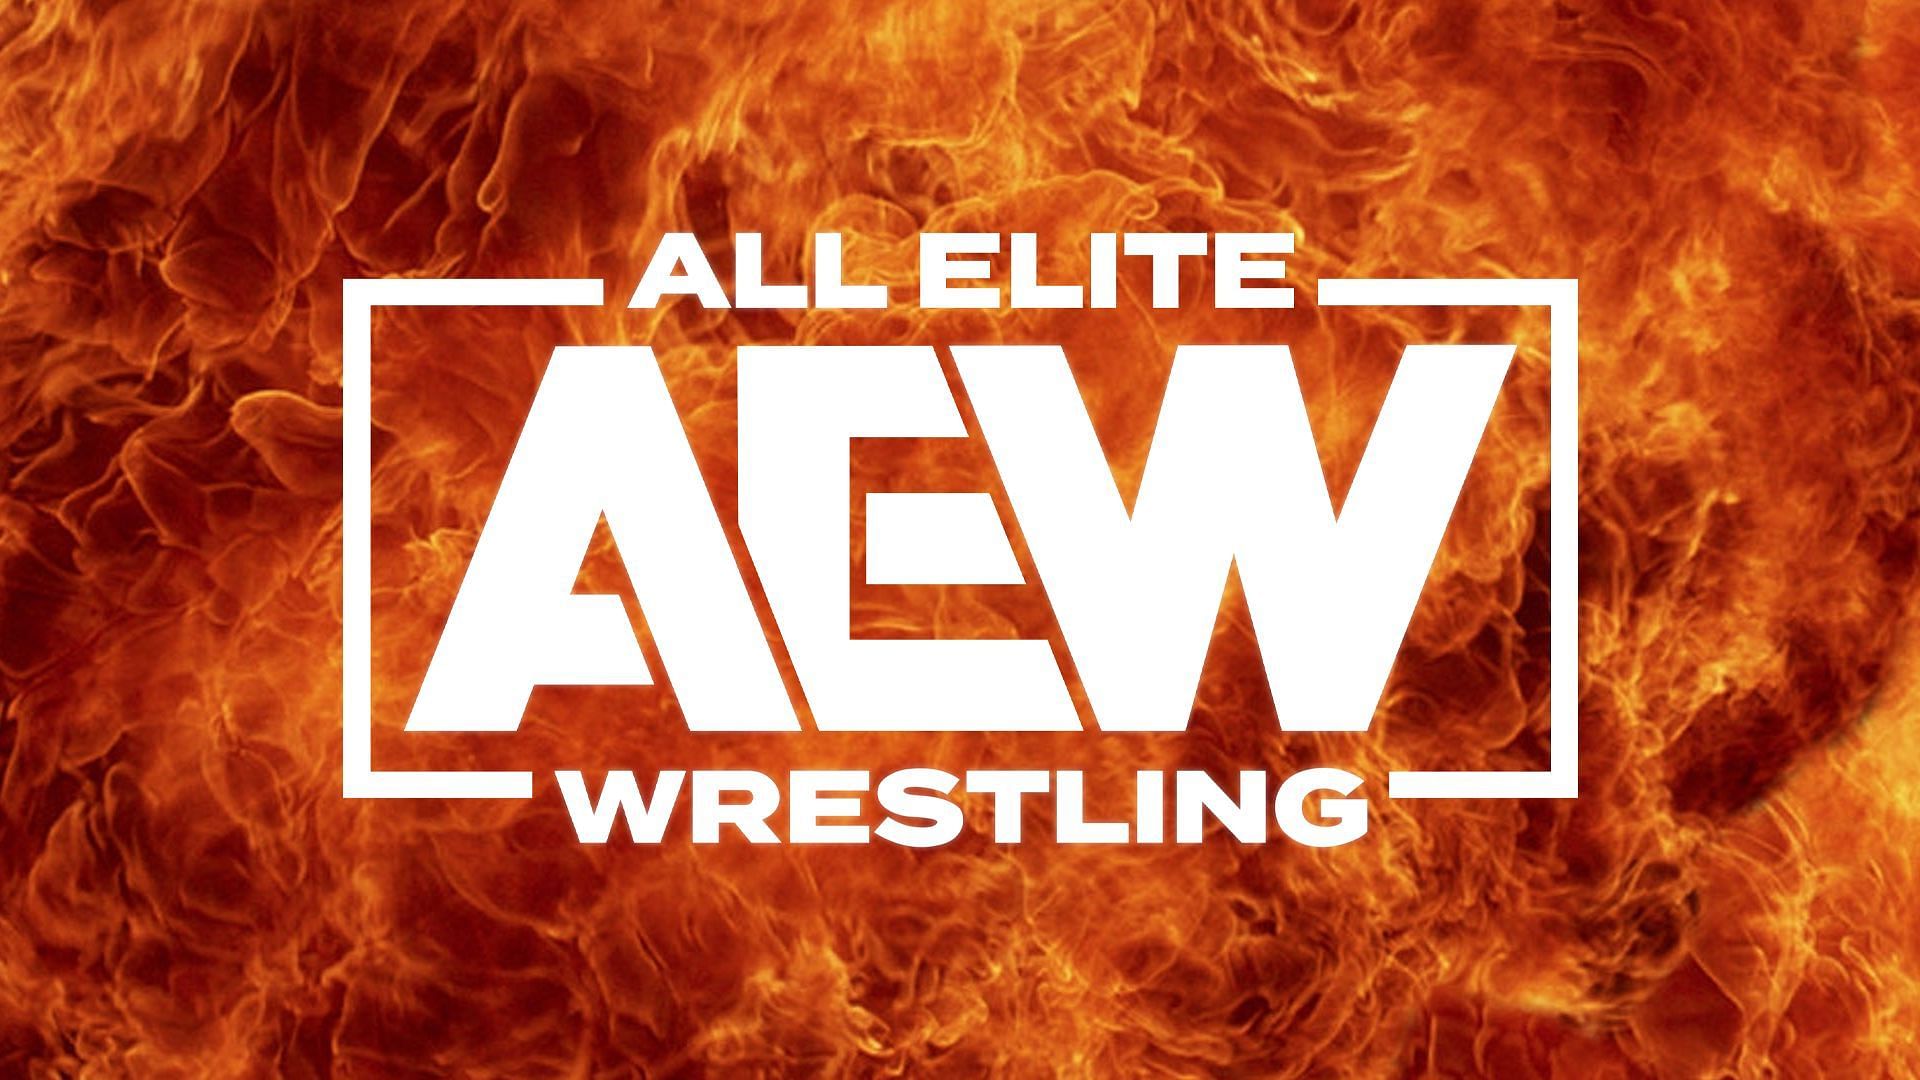 A former champion could be on their way back to AEW